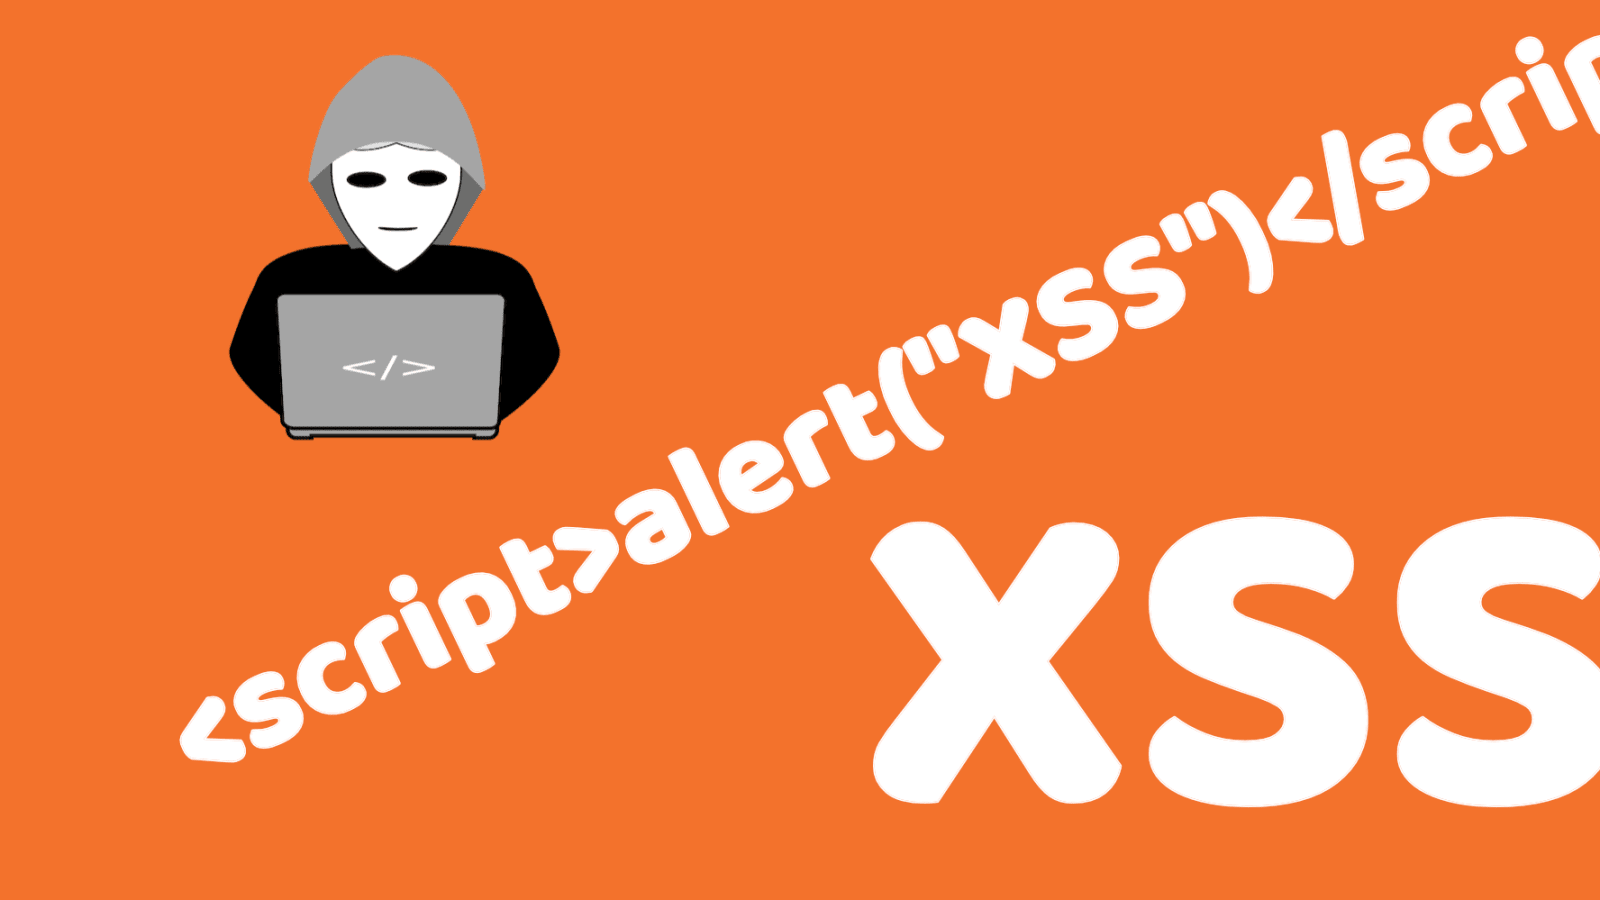 Our favourite community contributions to the XSS cheat sheet